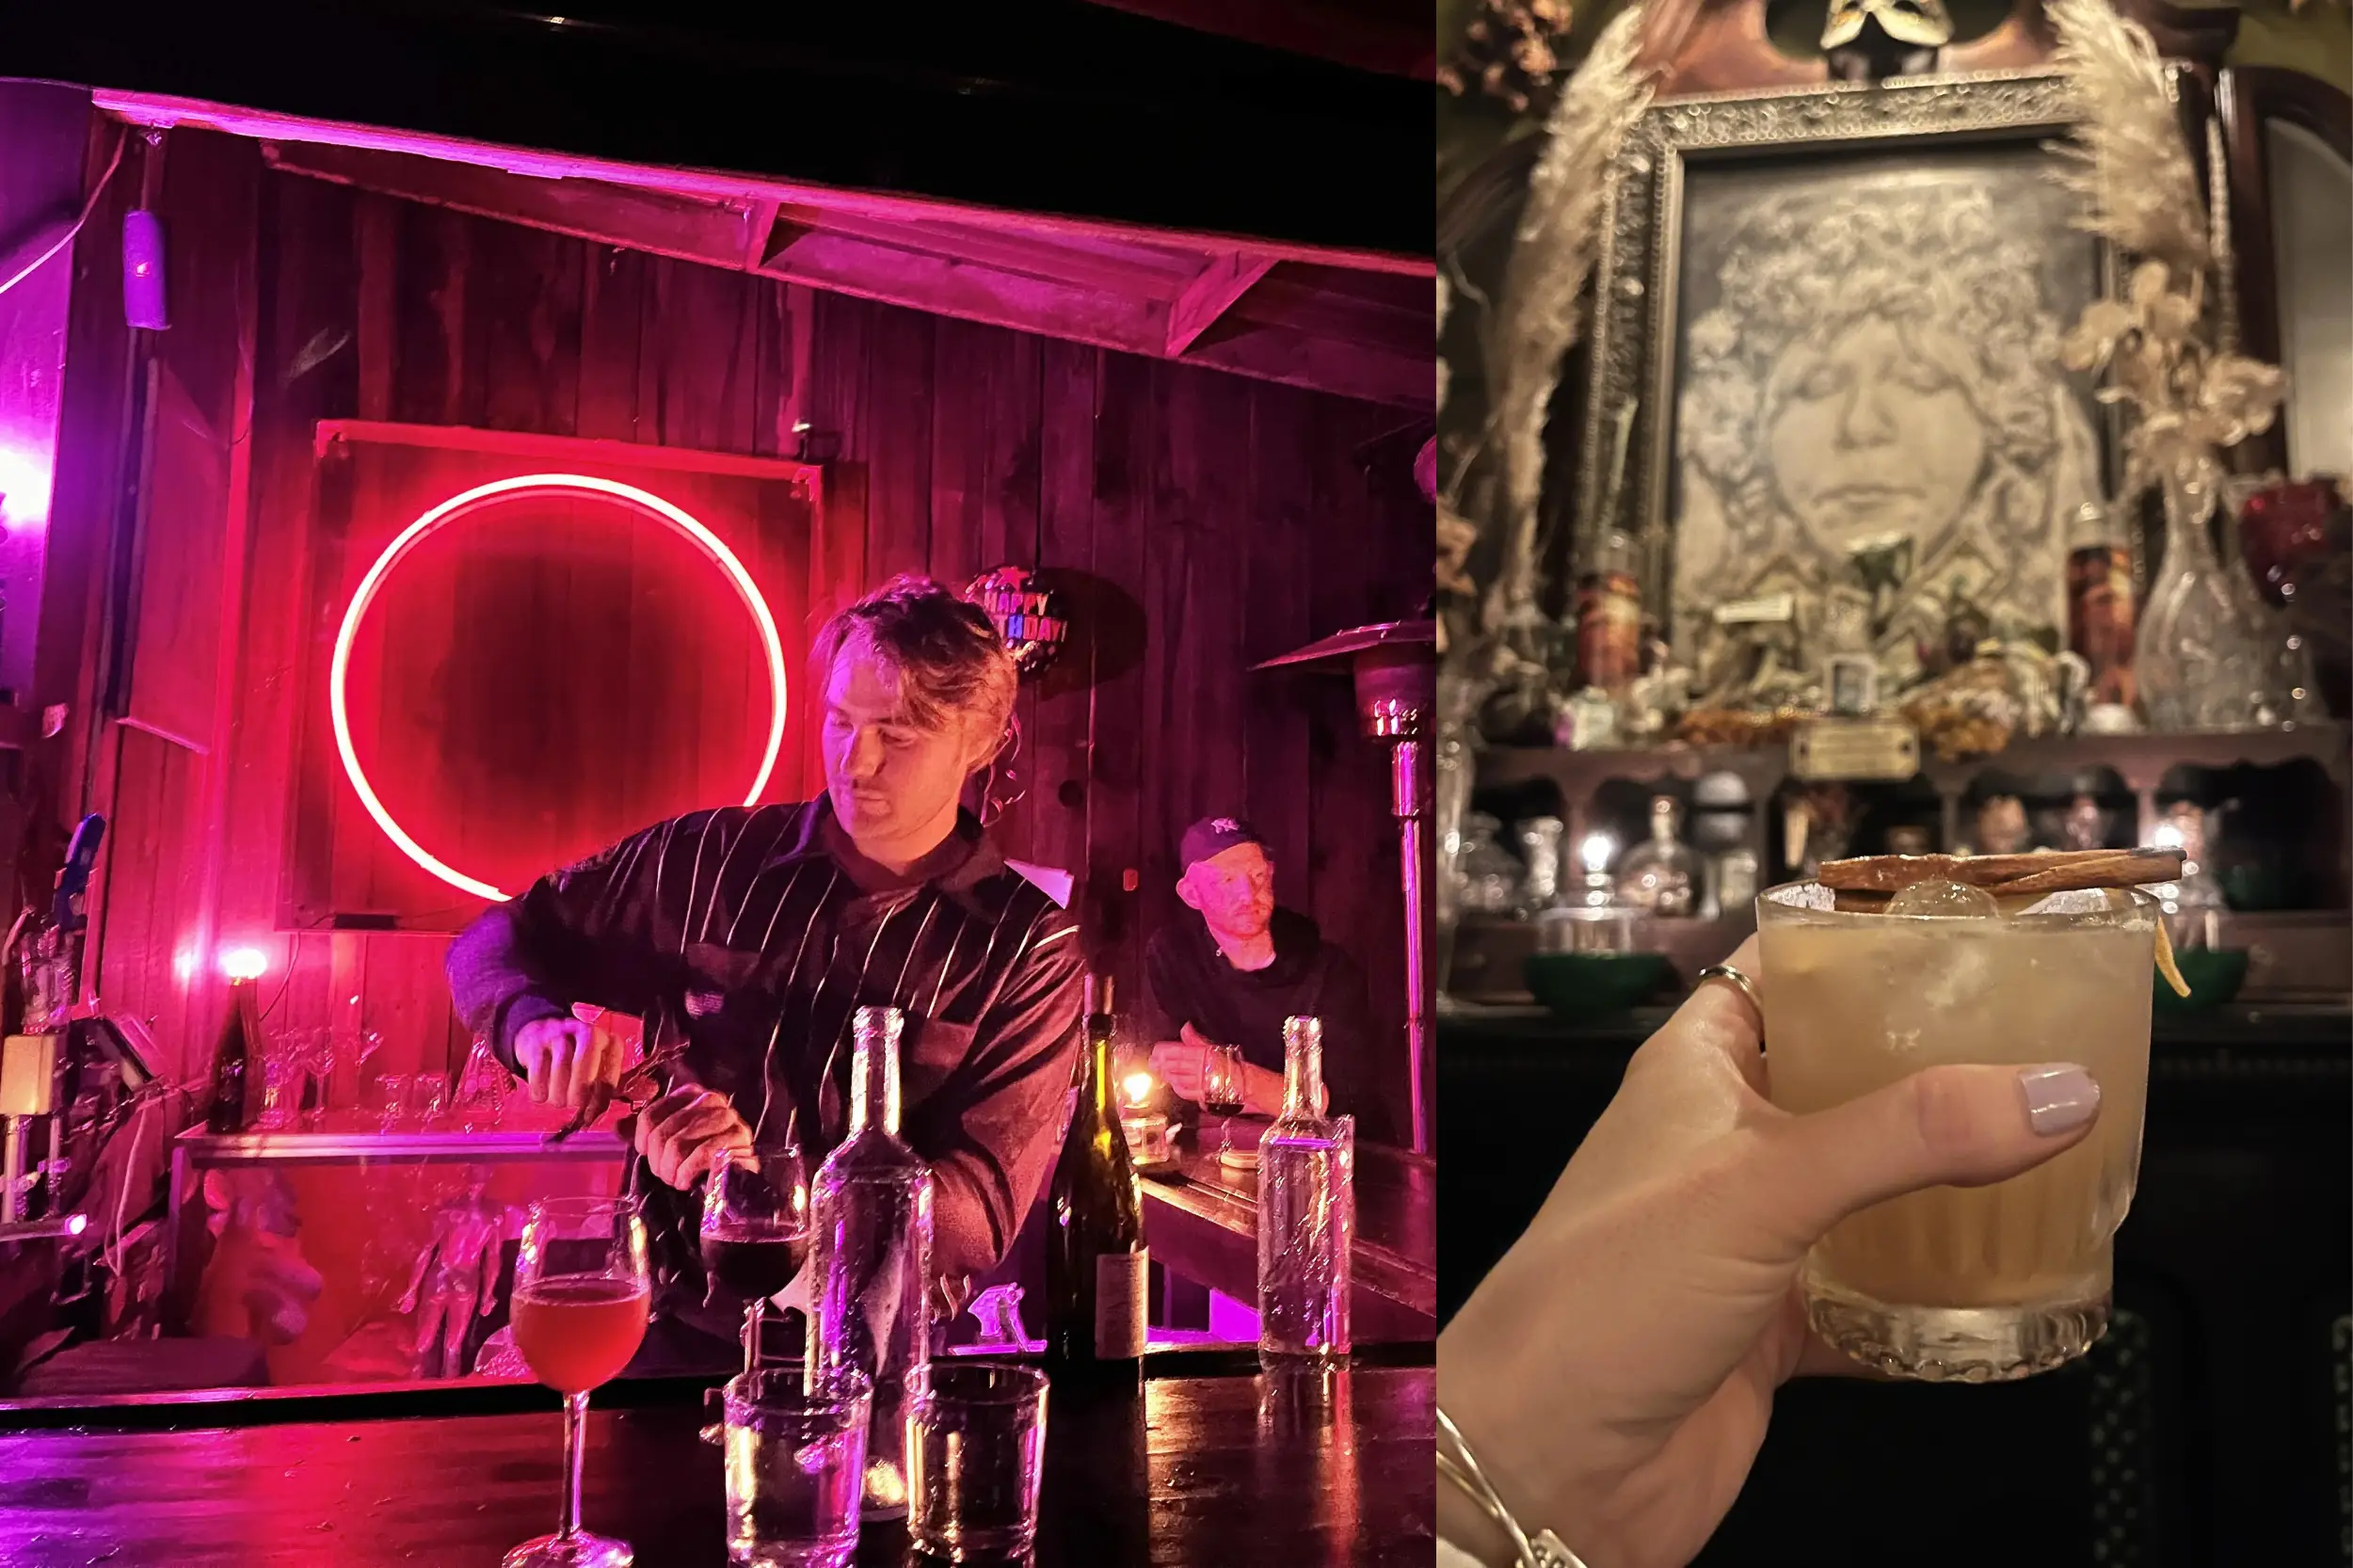 Photos representing the Asheville speakeasy scene, which includes a photo of Pink Moon Bar Asheville and the Crow and Quill